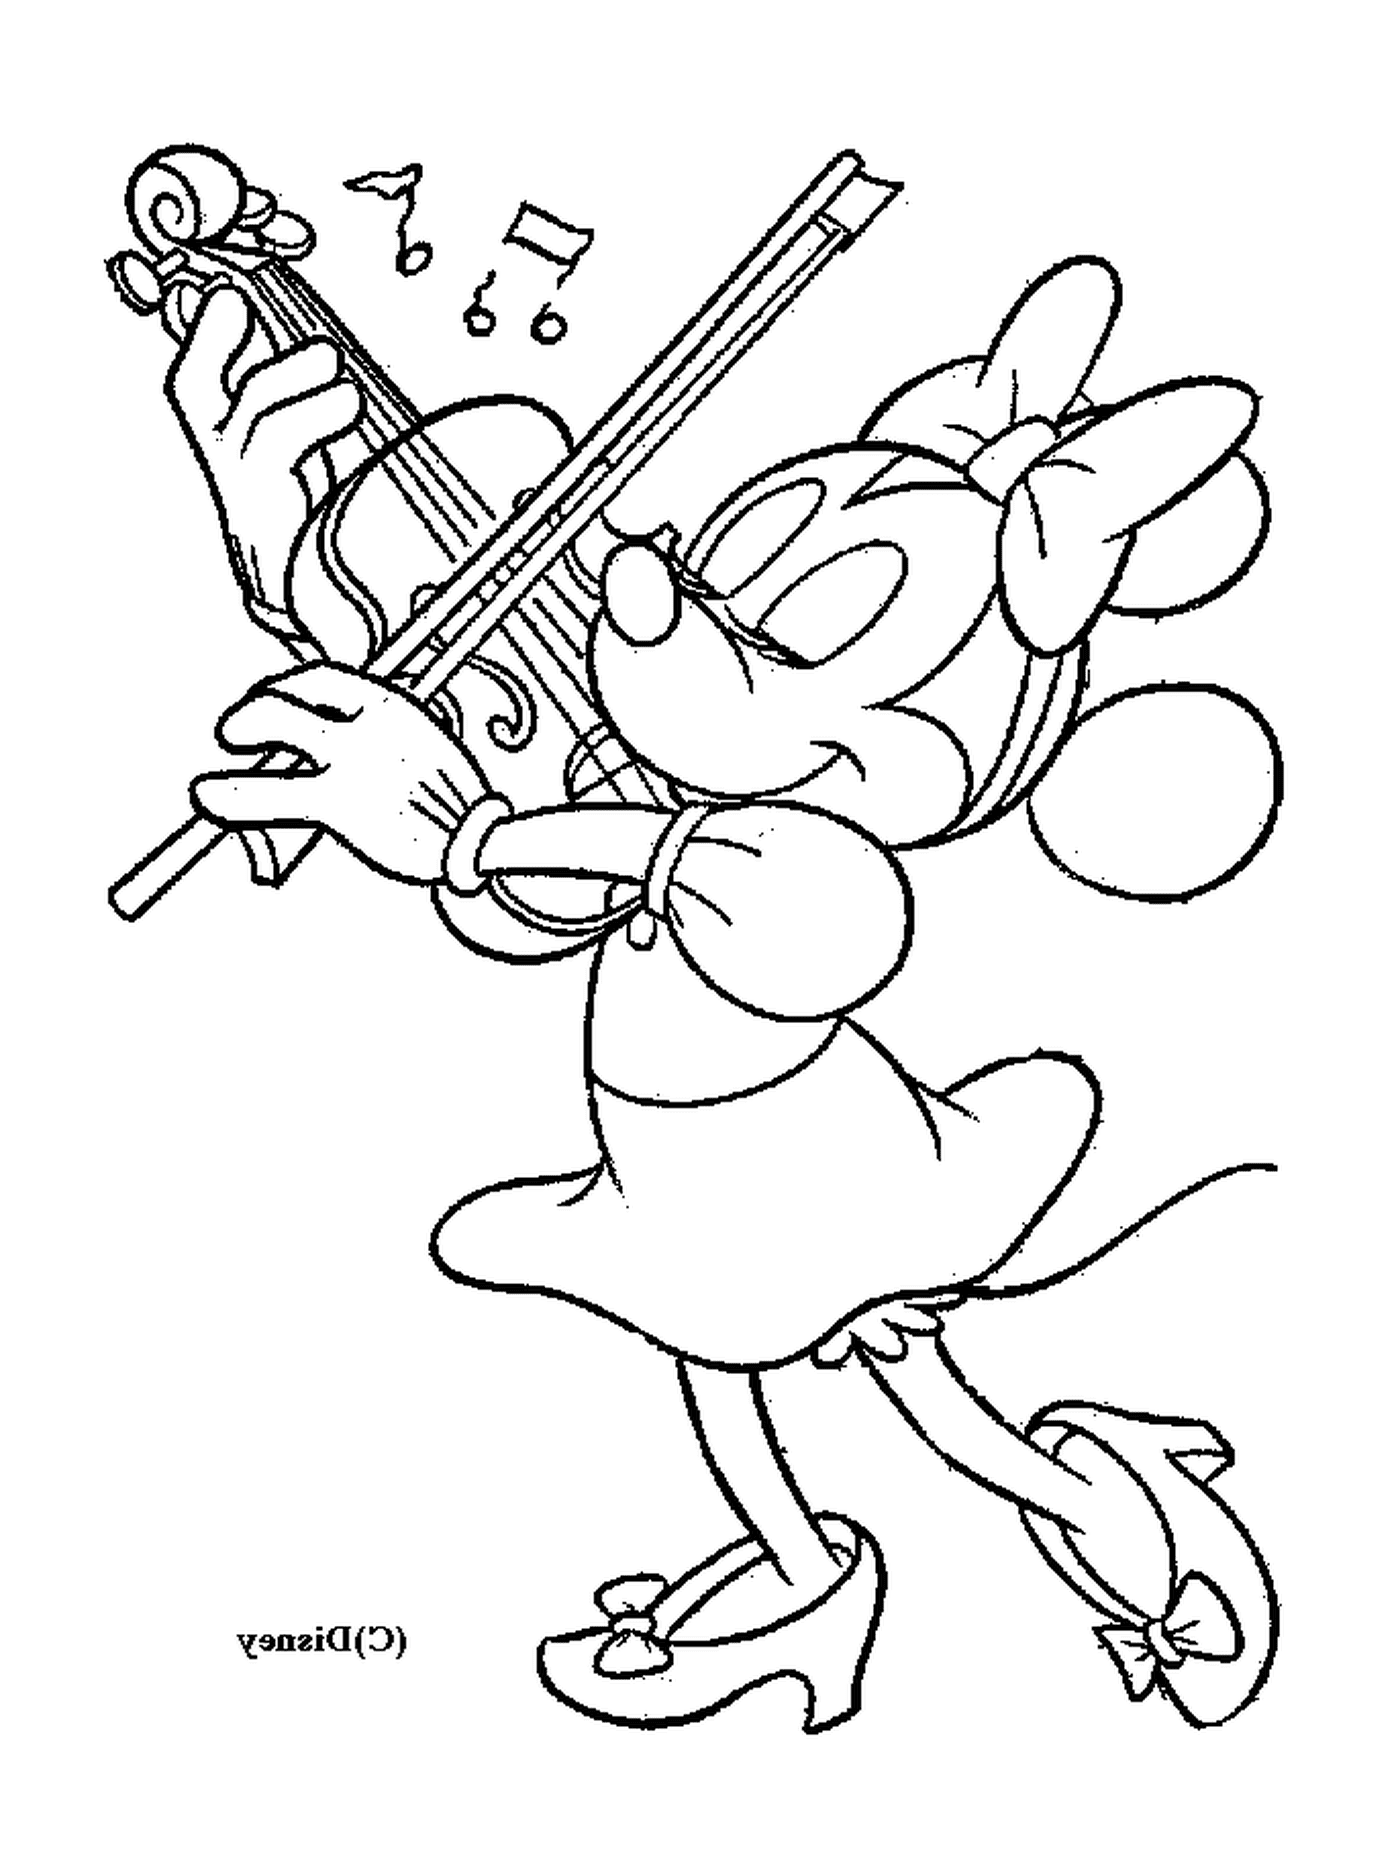  Minnie playing the violin 